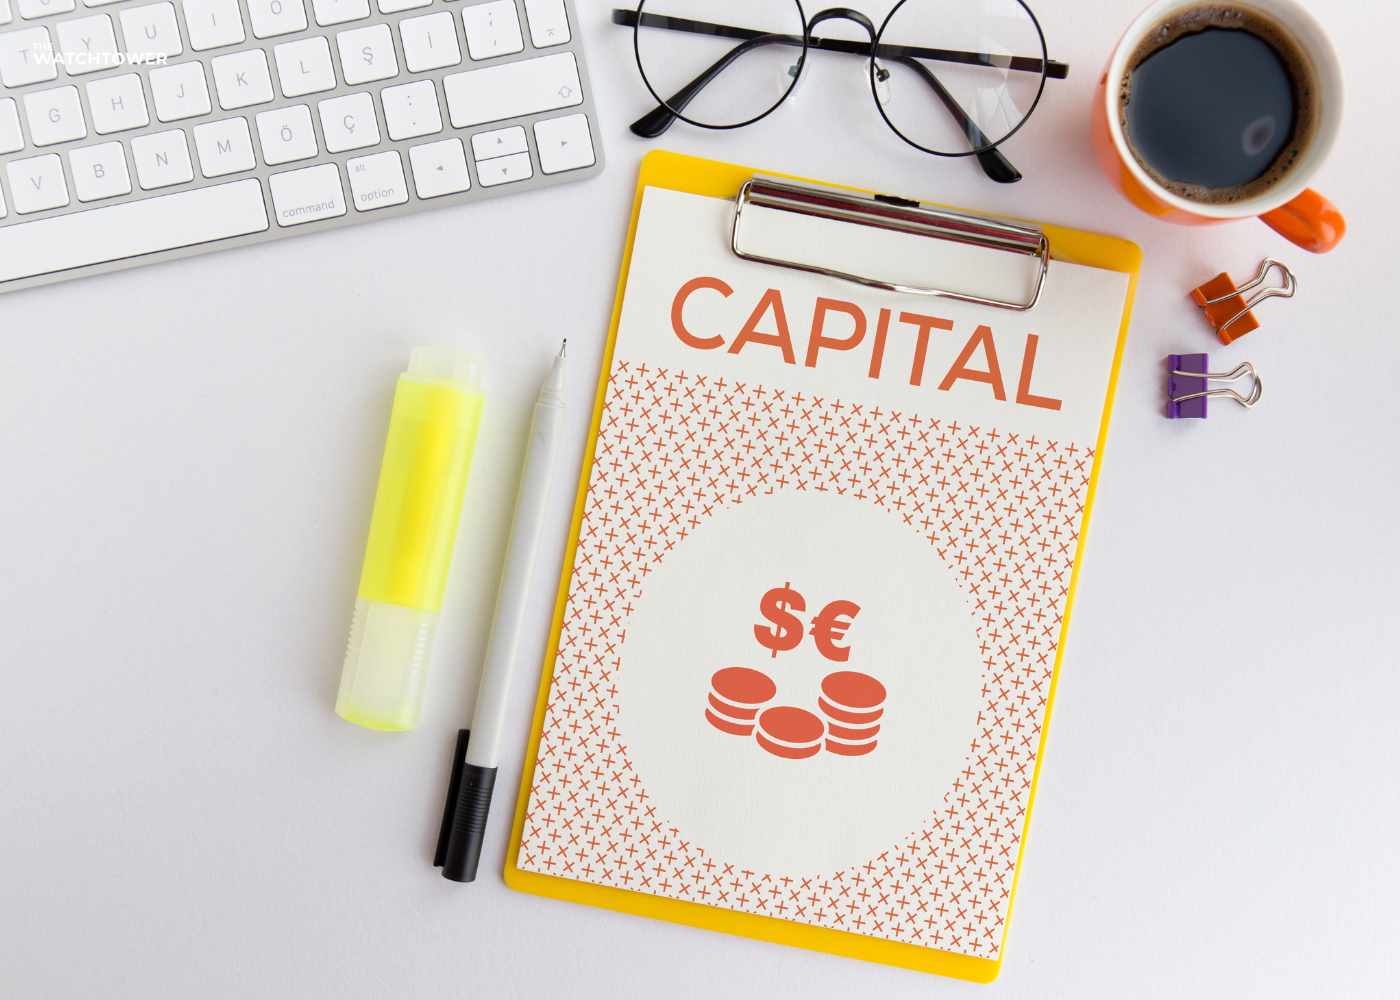 How to Improve Liquidity and Working Capital